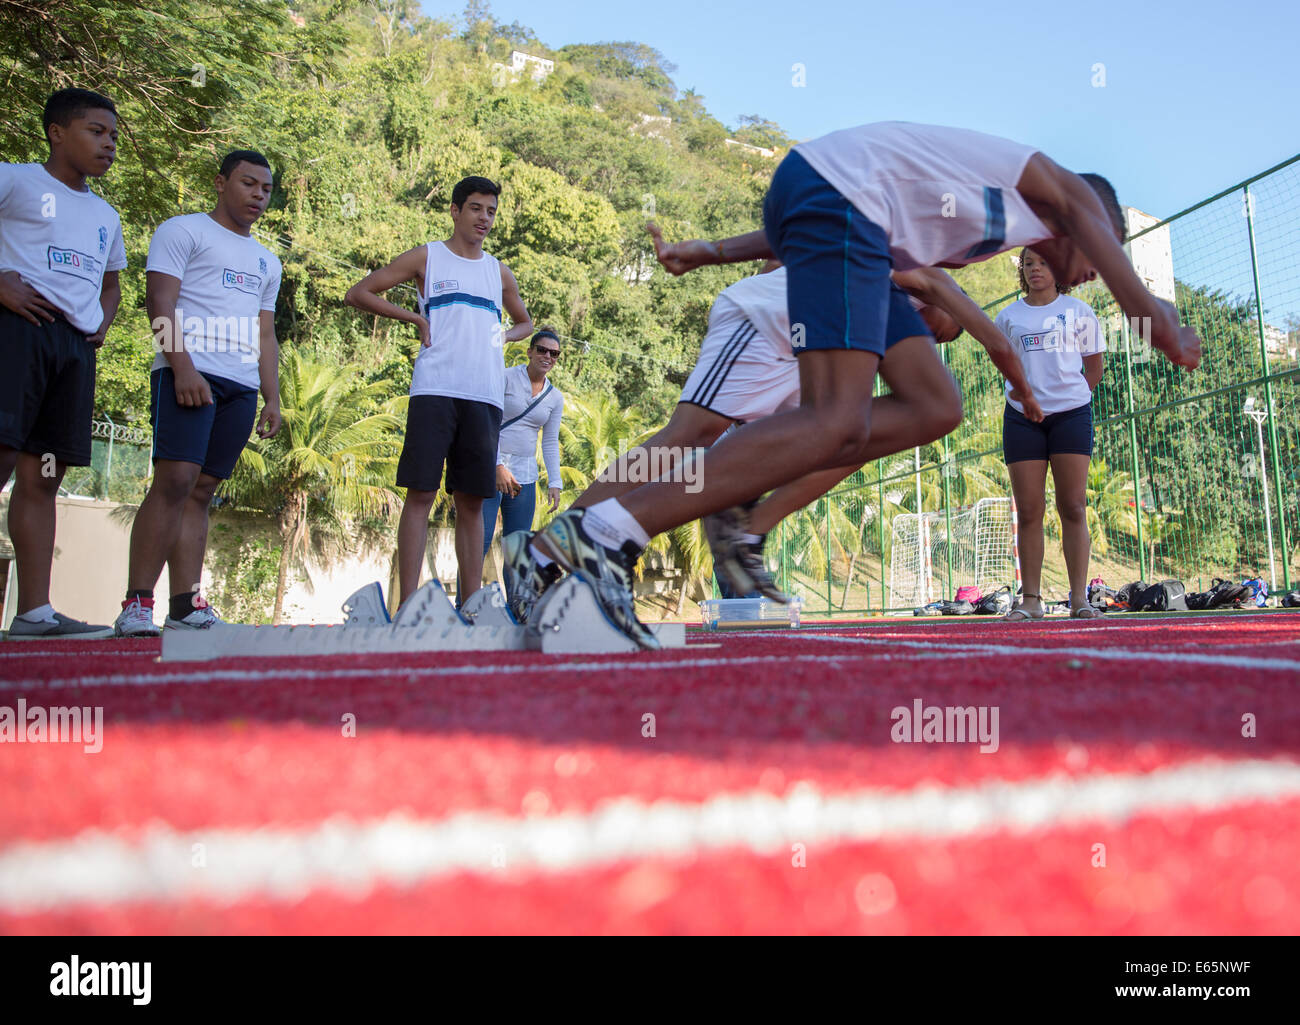 Rio de Janeiro, Brazil. 8th Aug, 2014. Students of Brazil's first sports high school, Ginasio Experimental Olimpico (GEO), are practicing on the racetrack of their school in Rio de Janeiro, Brazil, 8 August 2014. The 2016 summer olympics are going to be carried out in Rio de Janeiro. Photo: Michael Kappeler/dpa/Alamy Live News Stock Photo